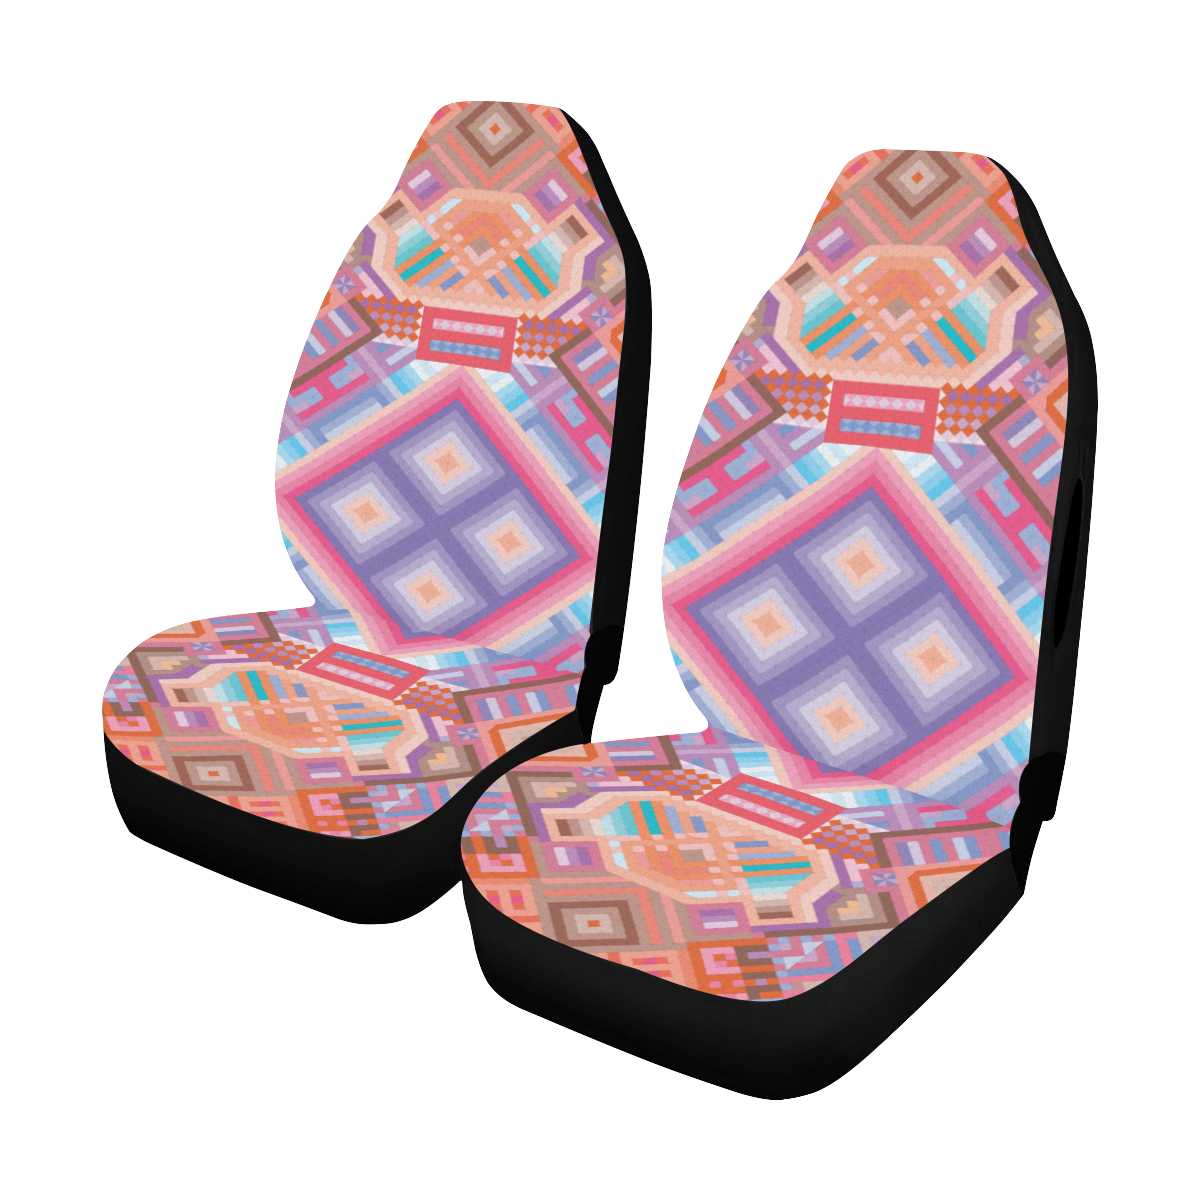 Researcher Car Seat Cover Airbag Compatible (Set of 2)